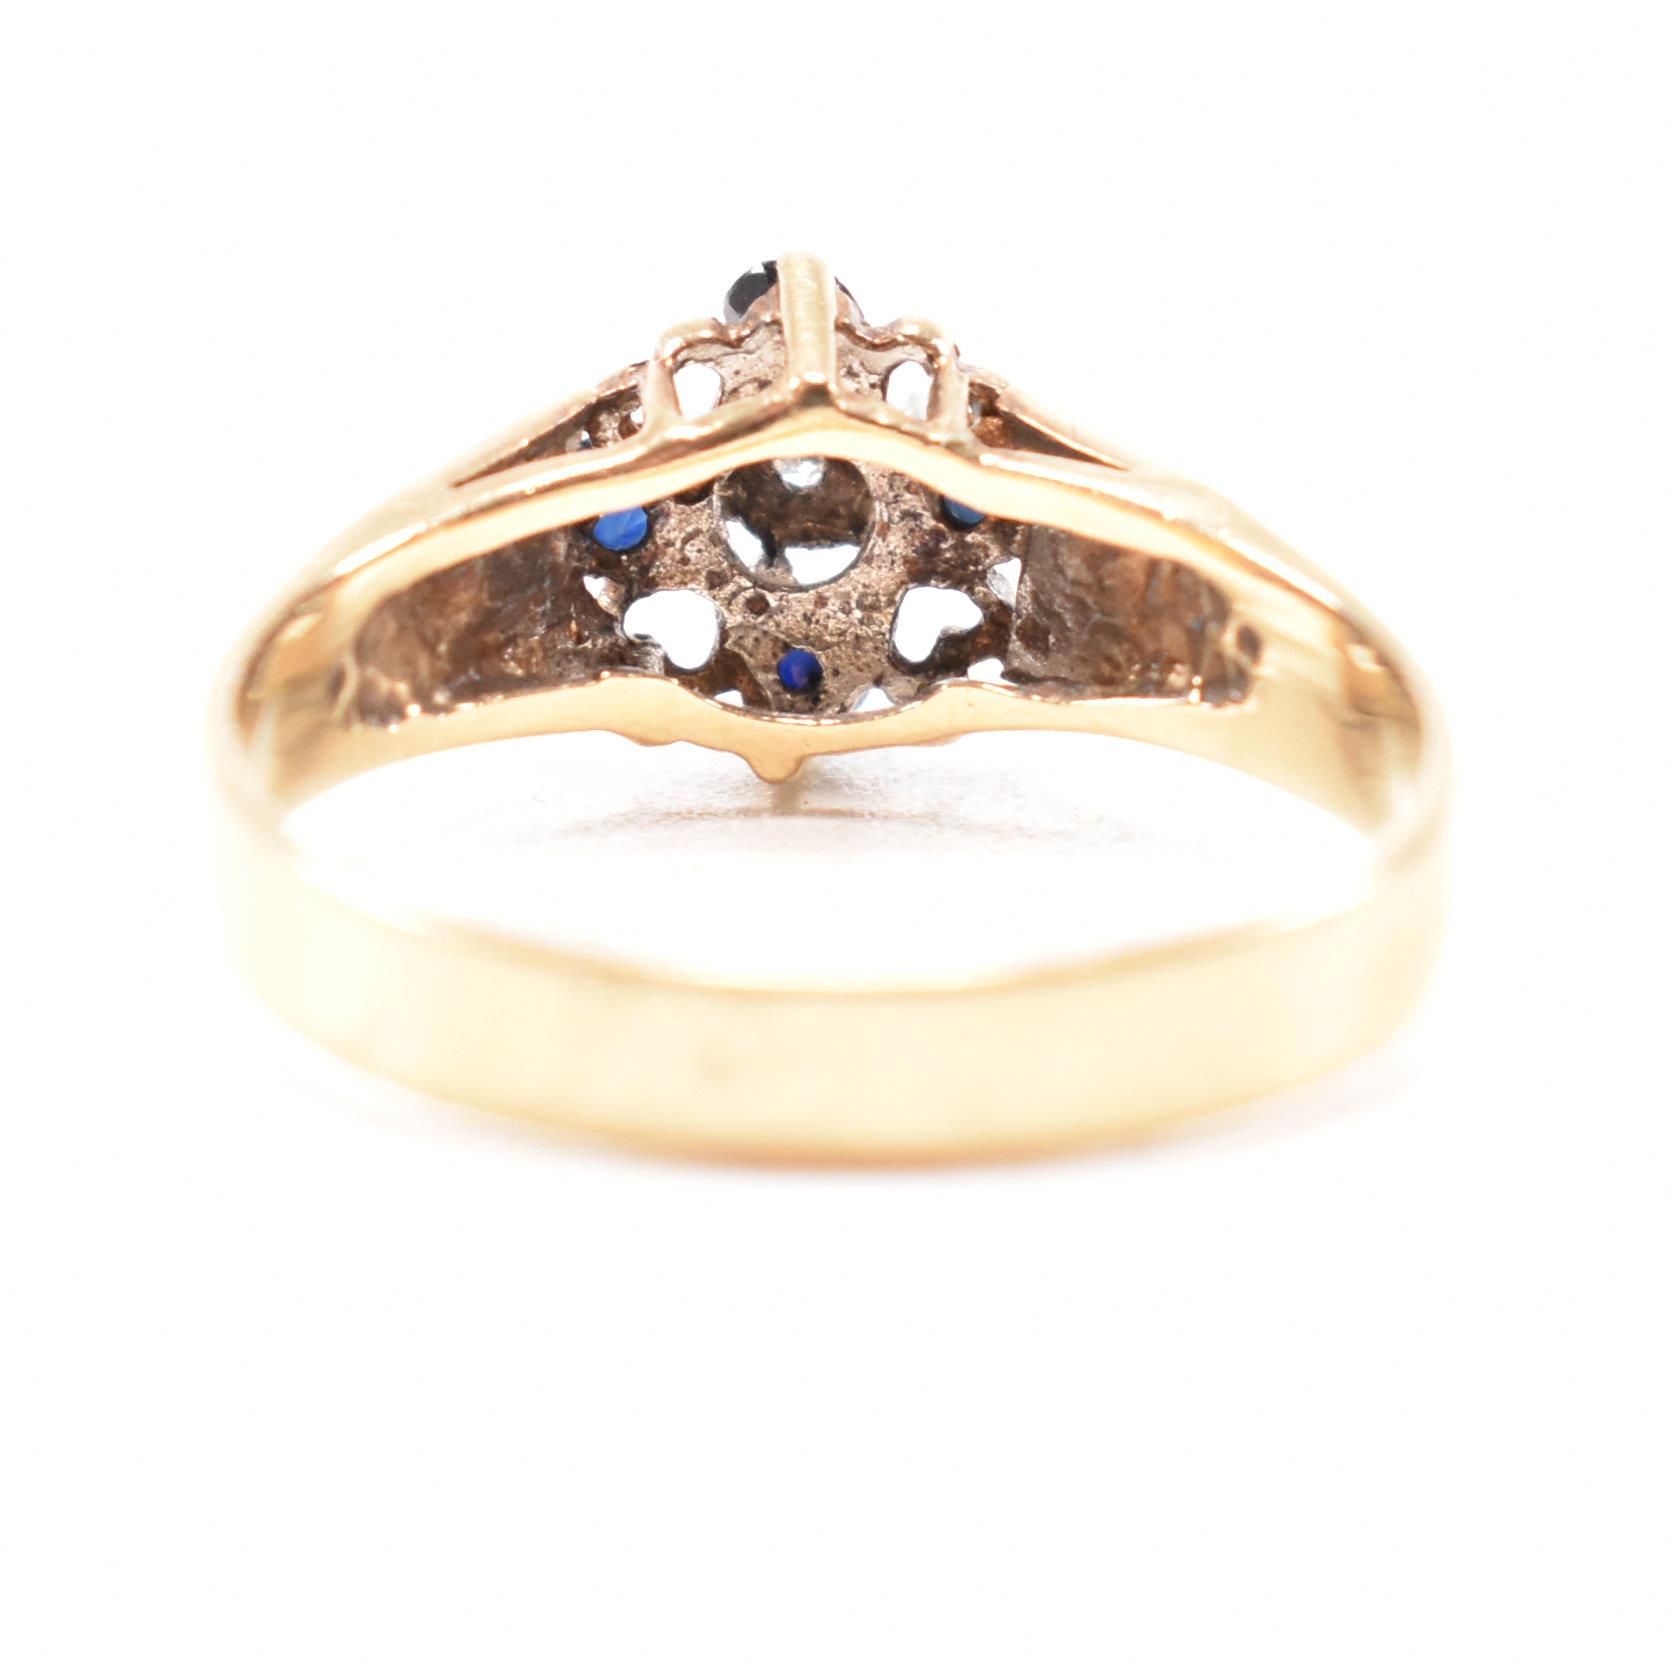 VINTAGE HALLMARKED 9CT GOLD SAPPHIRE & DIAMOND CLUSTER RING - Image 4 of 7